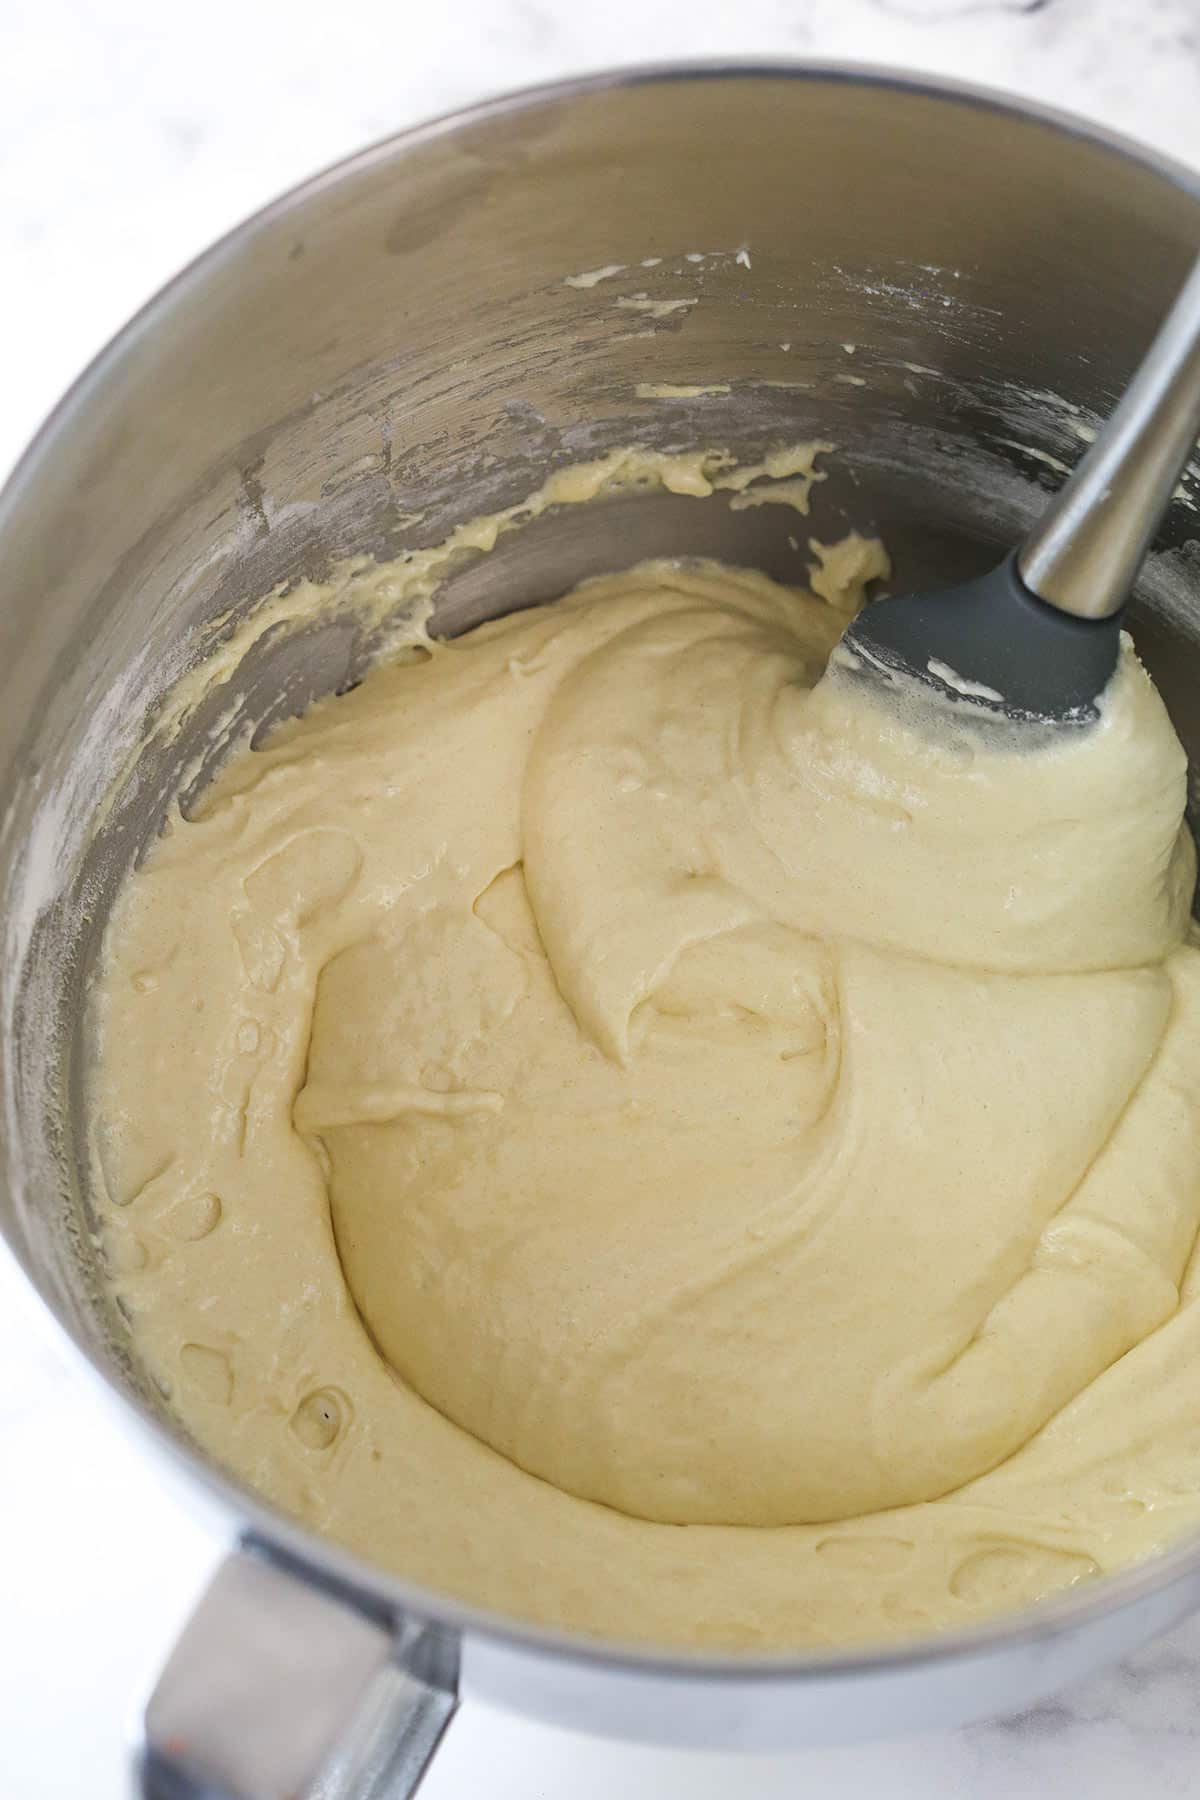 Gradually folding dry ingredients into whipped eggs, sugar, and vanilla.